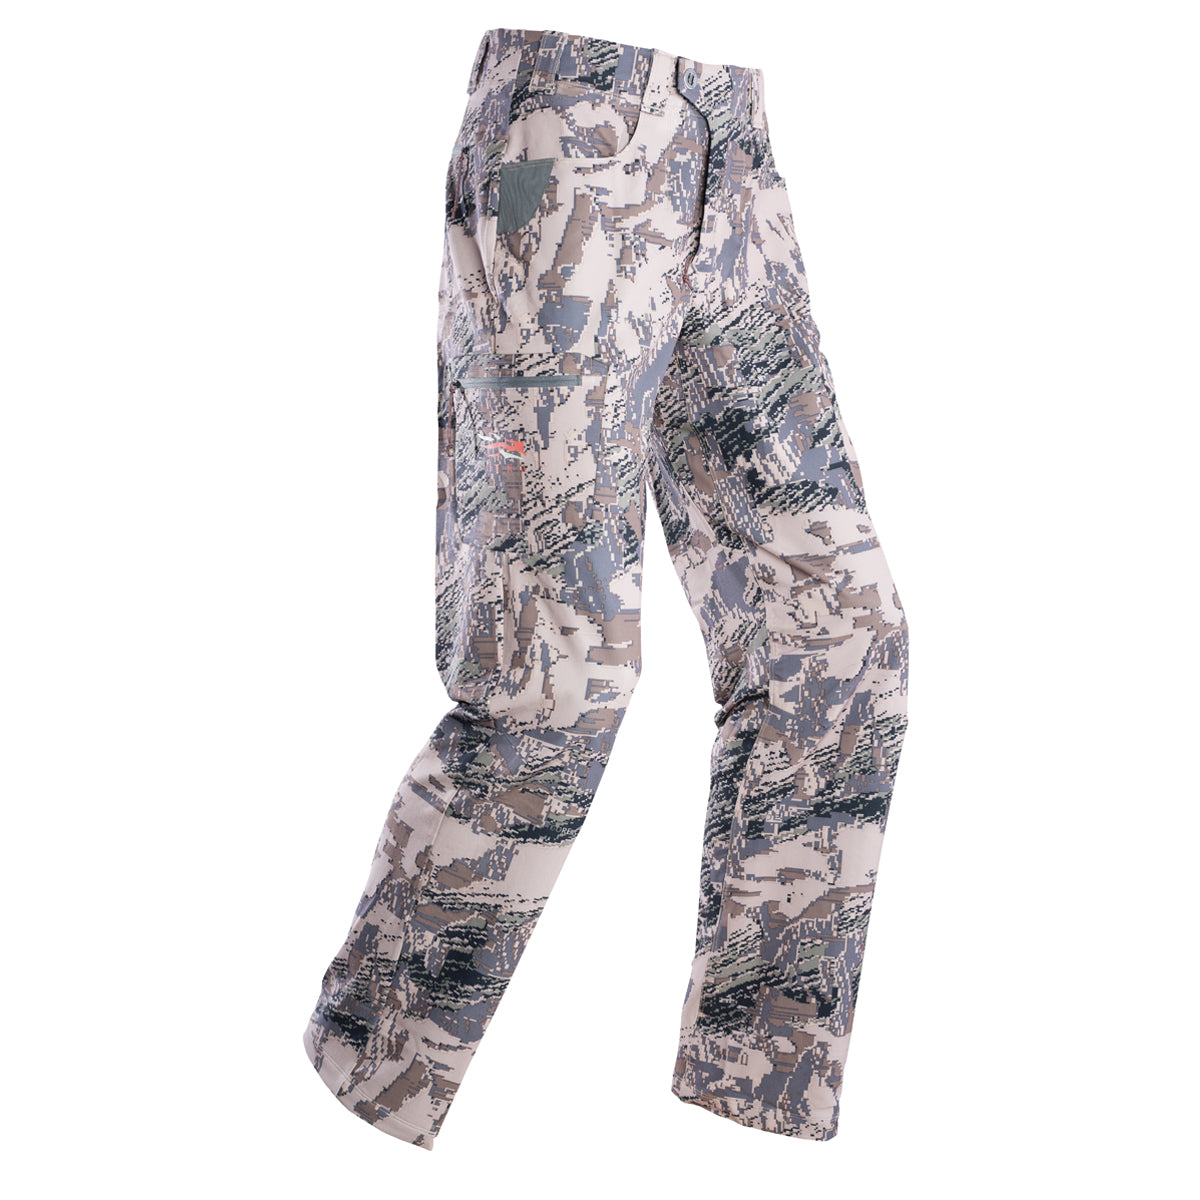 Sitka Traverse Pant (2021) in Optifade Open Country by GOHUNT | Sitka - GOHUNT Shop